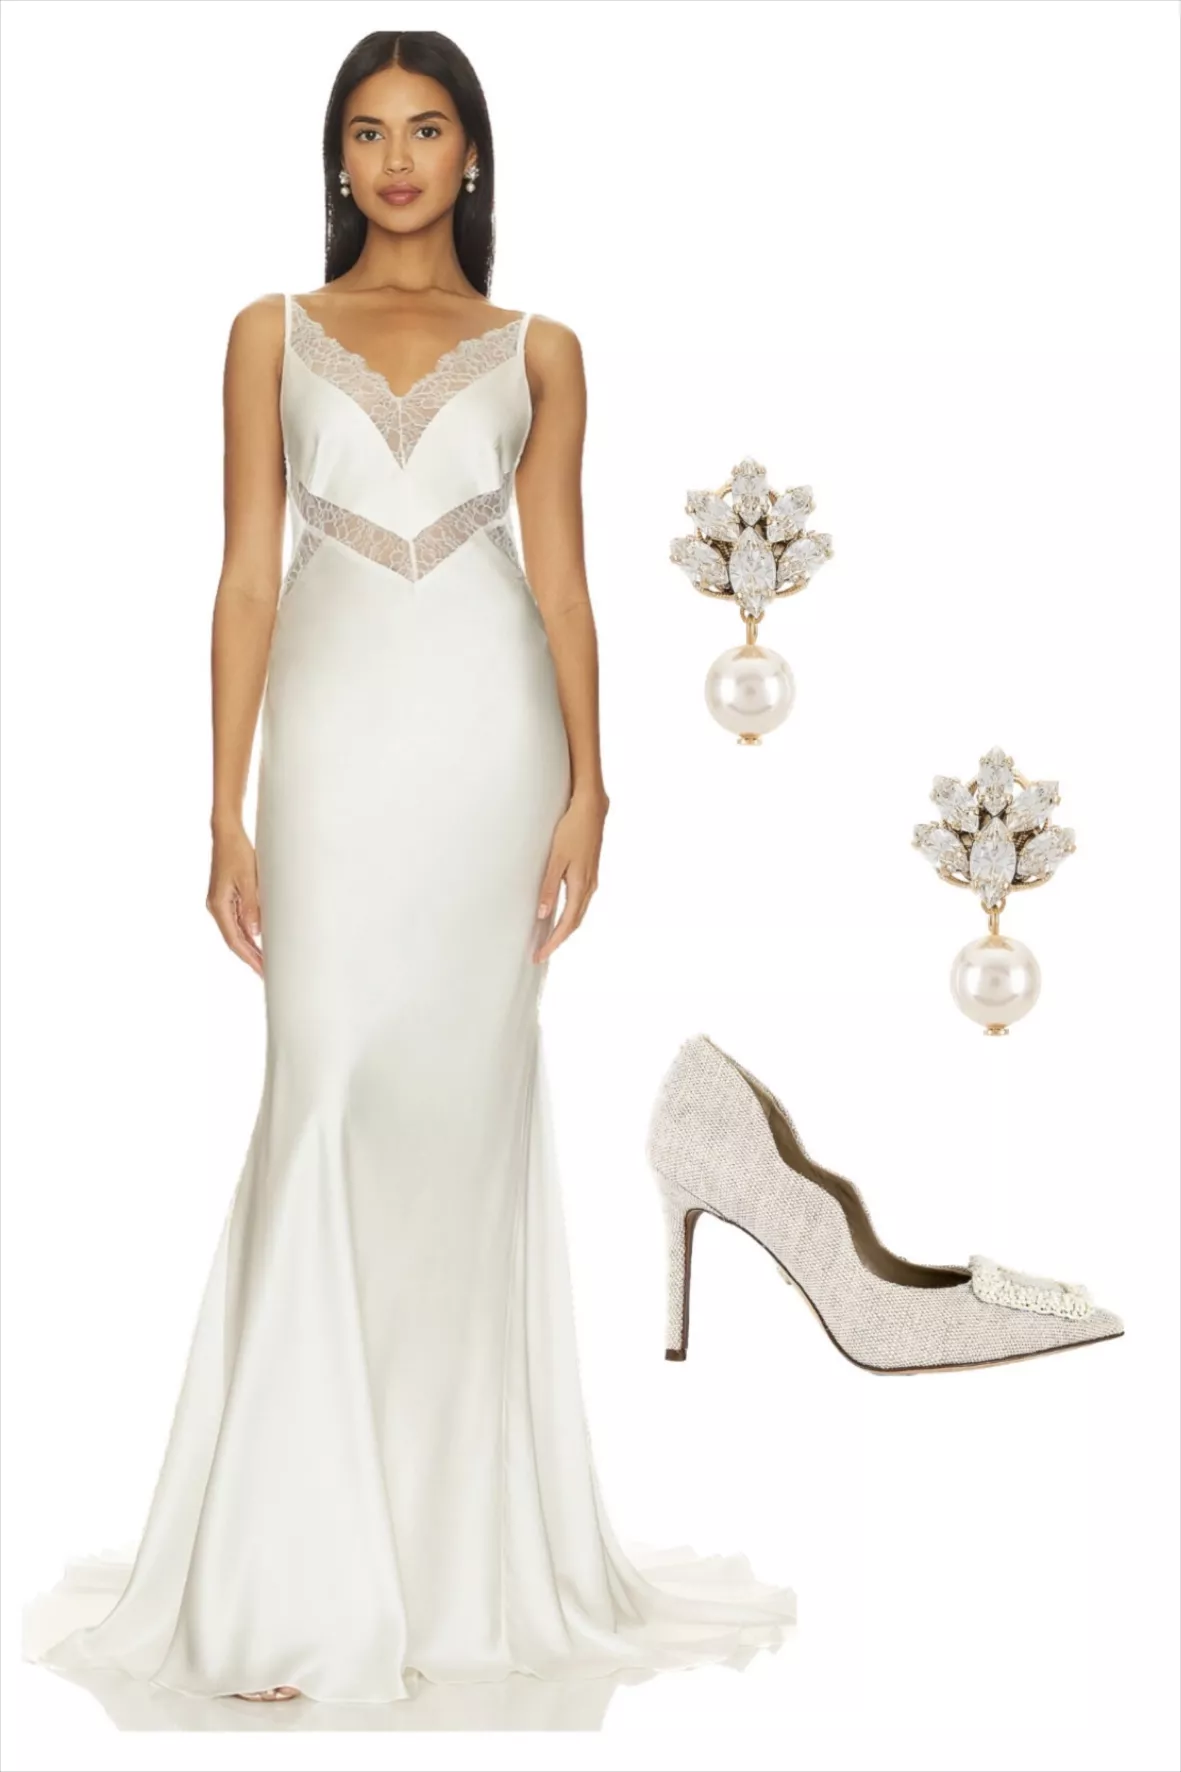  Wedding & Engagement: Clothing, Shoes & Accessories